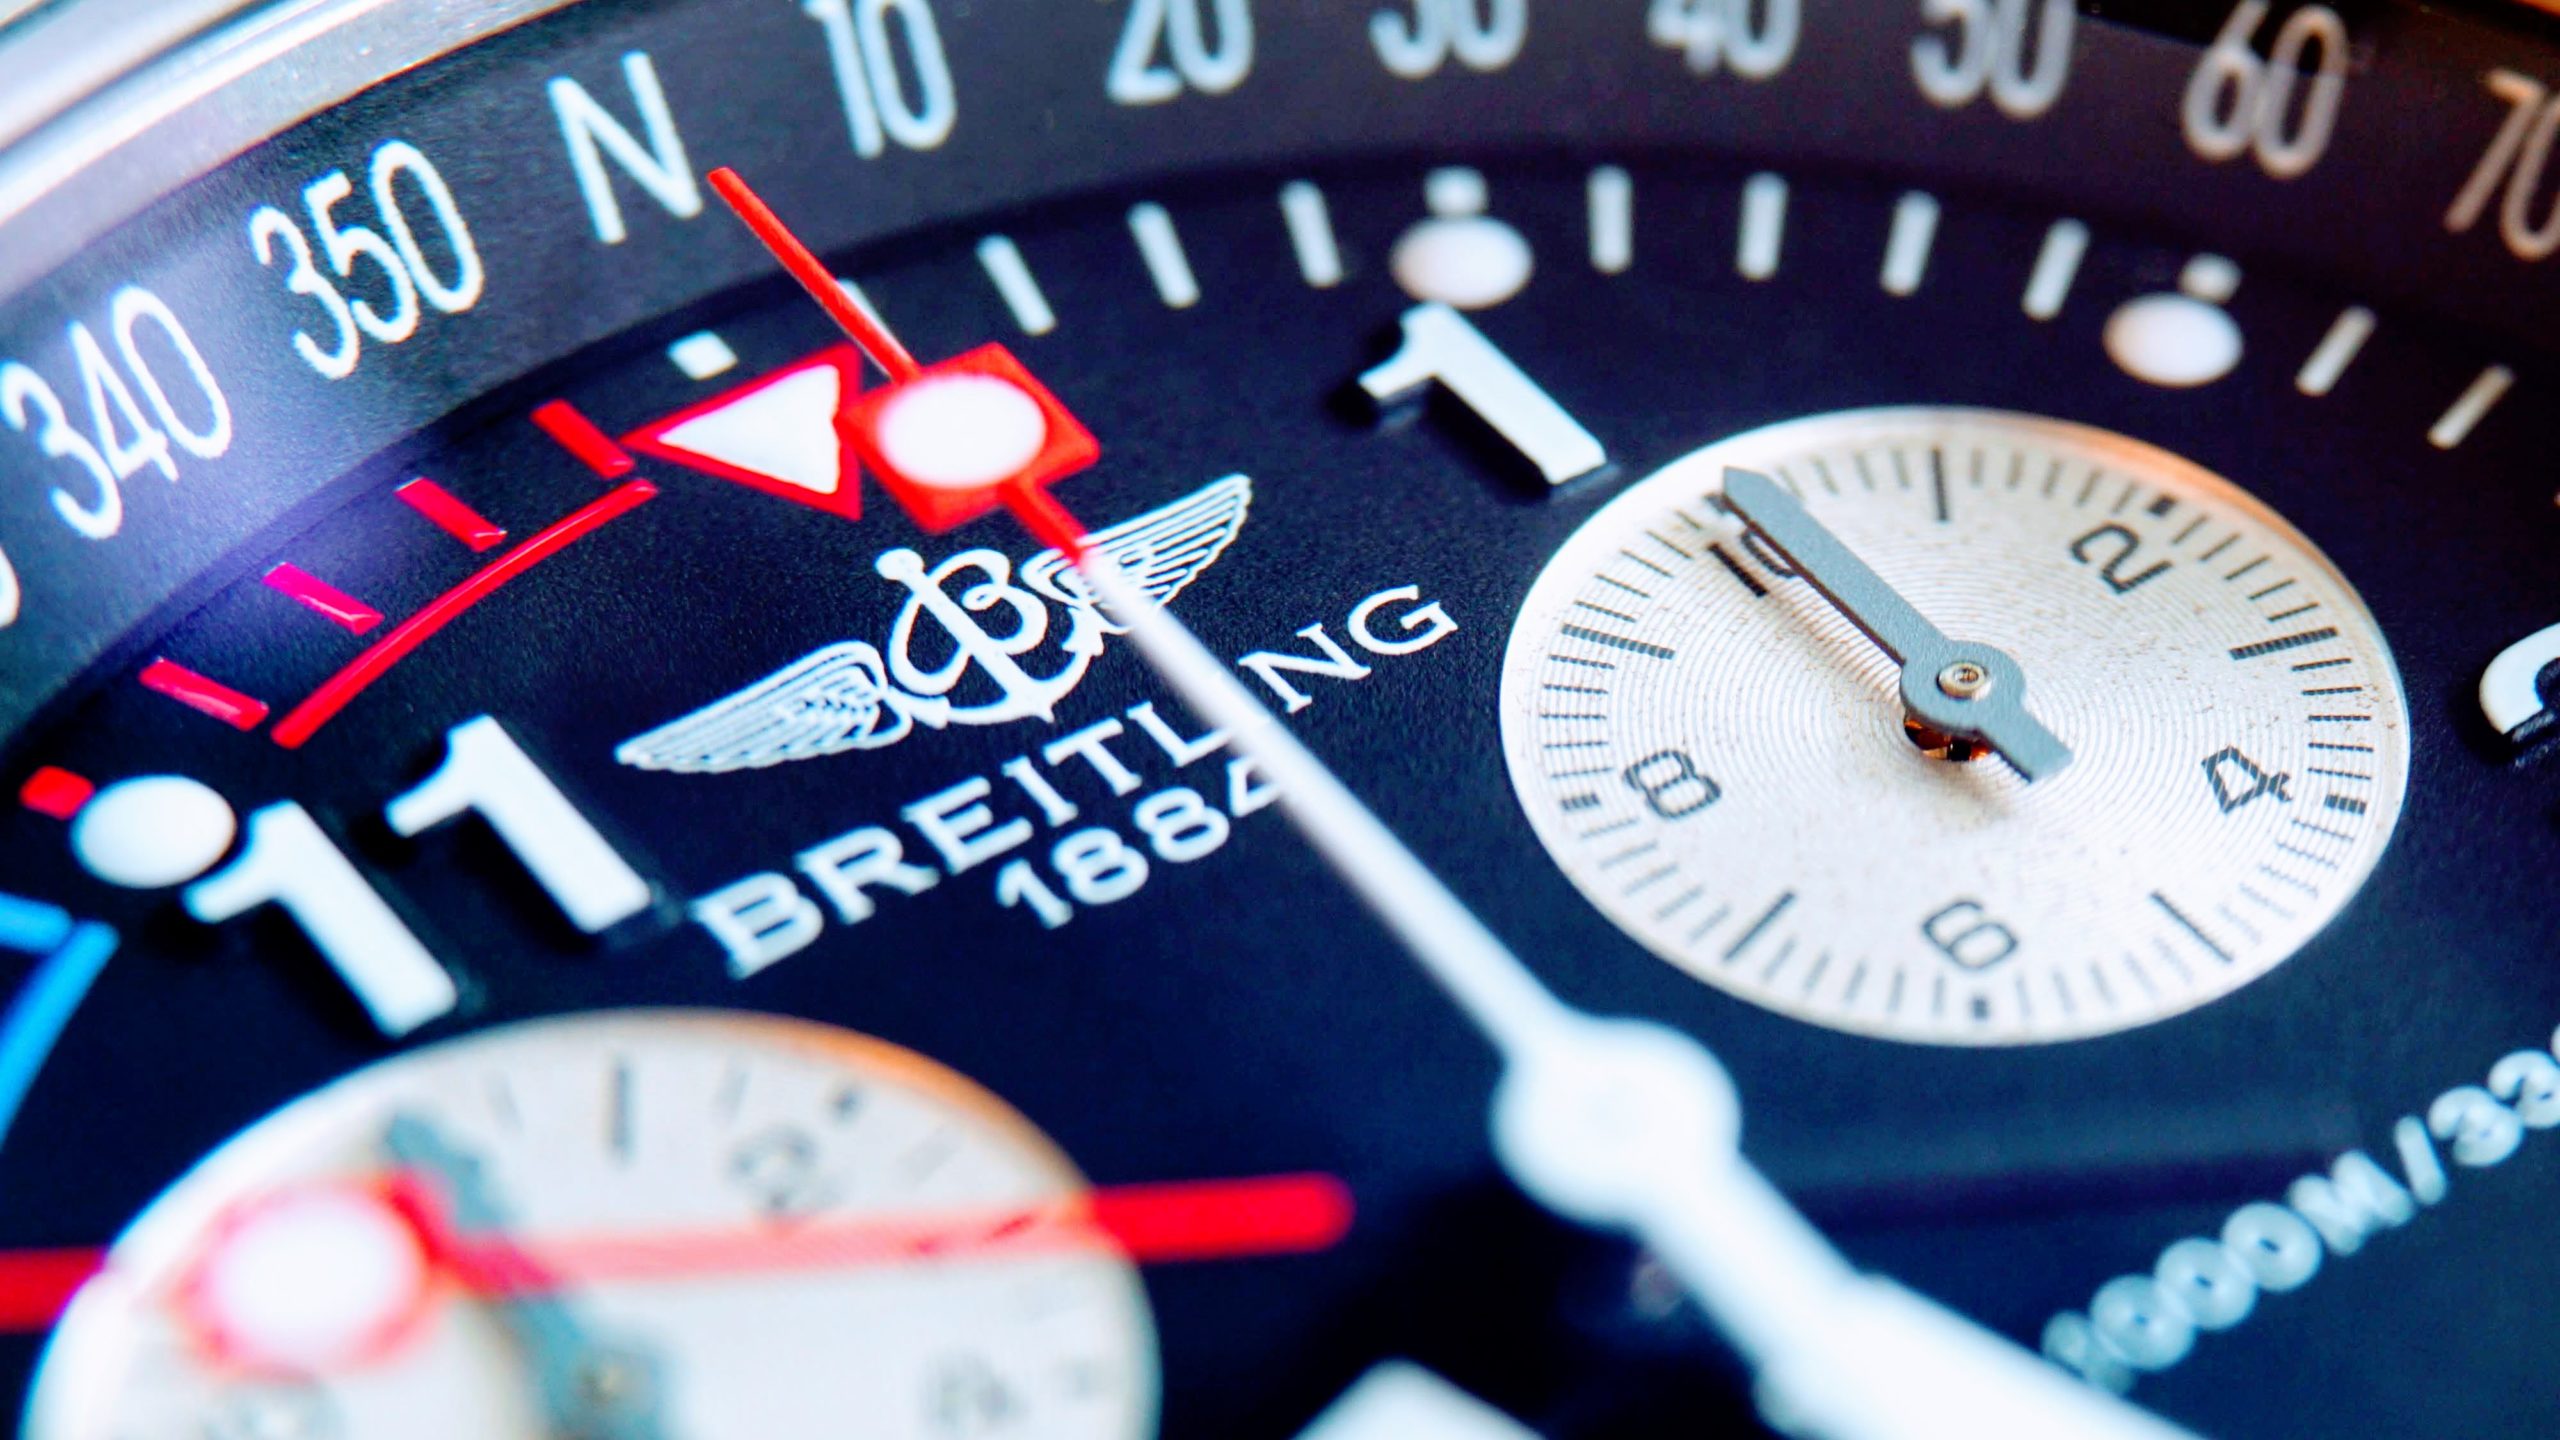 Write a funny 300 word blog post about the latest watch releases from Breitling. 